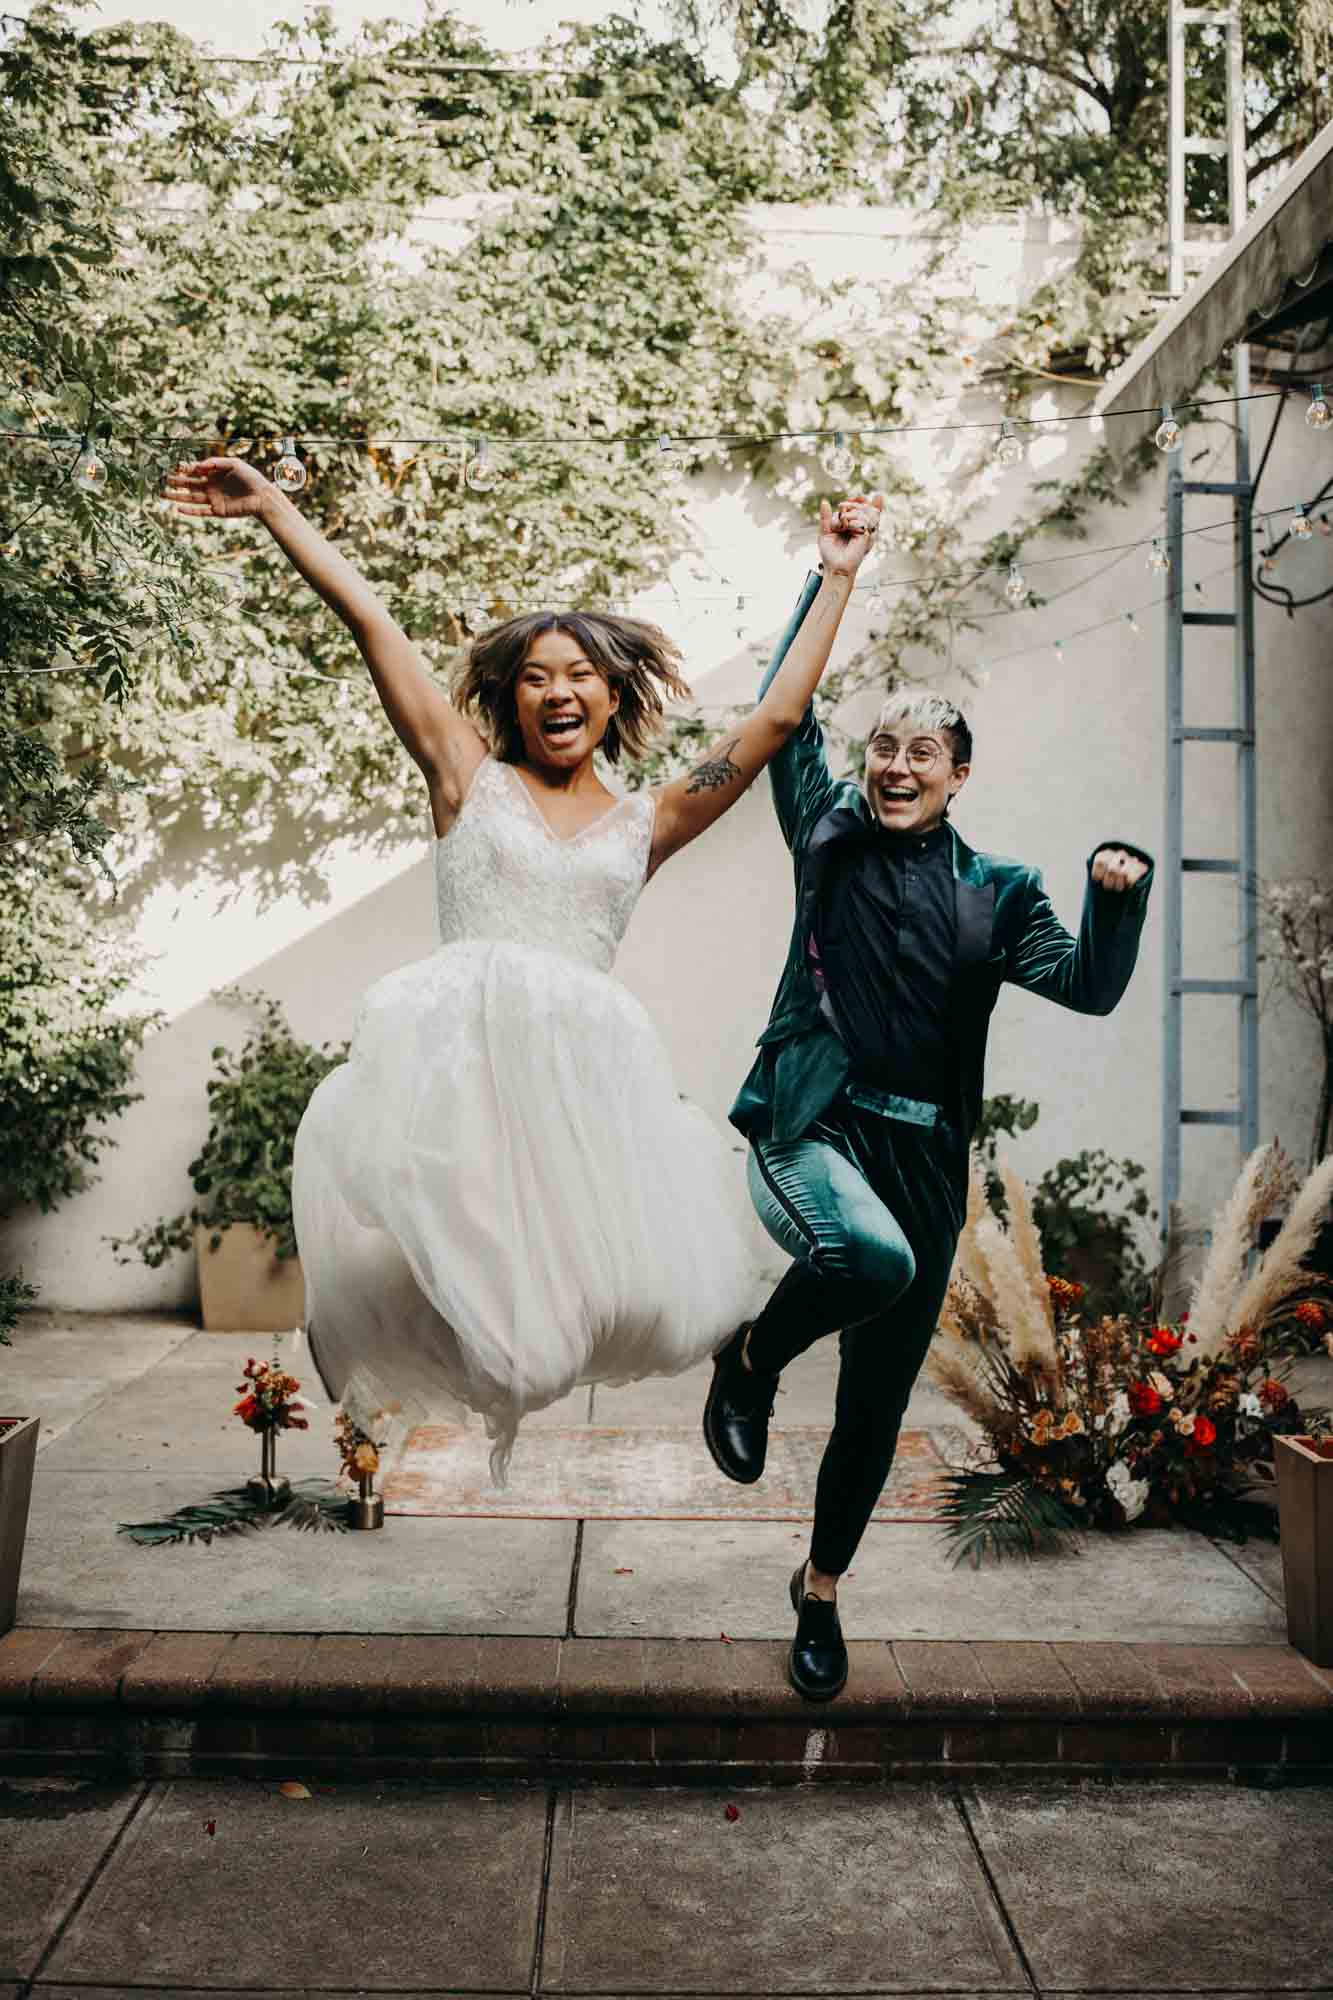 Outdoor Brooklyn microwedding styled shoot | Photography by Lucie B Photography | Featured on Equally Wed, the world's leading LGBTQ+ wedding magazine | LGBTQ+ marriers jump for joy after saying I do